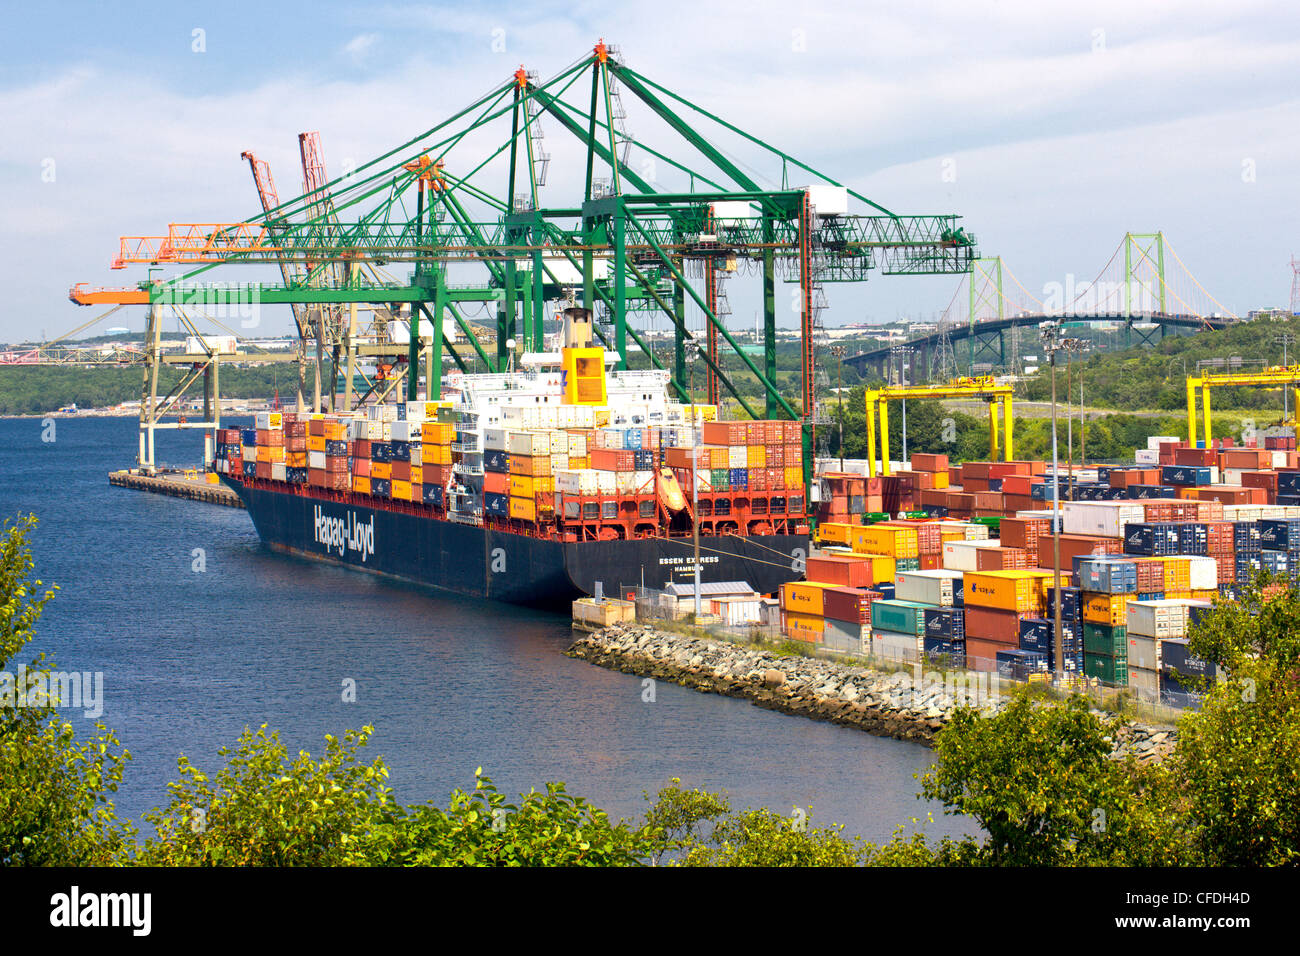 Container ship docked at Container Port, Bedford, Halifax, Nova Scotia, Canada Stock Photo